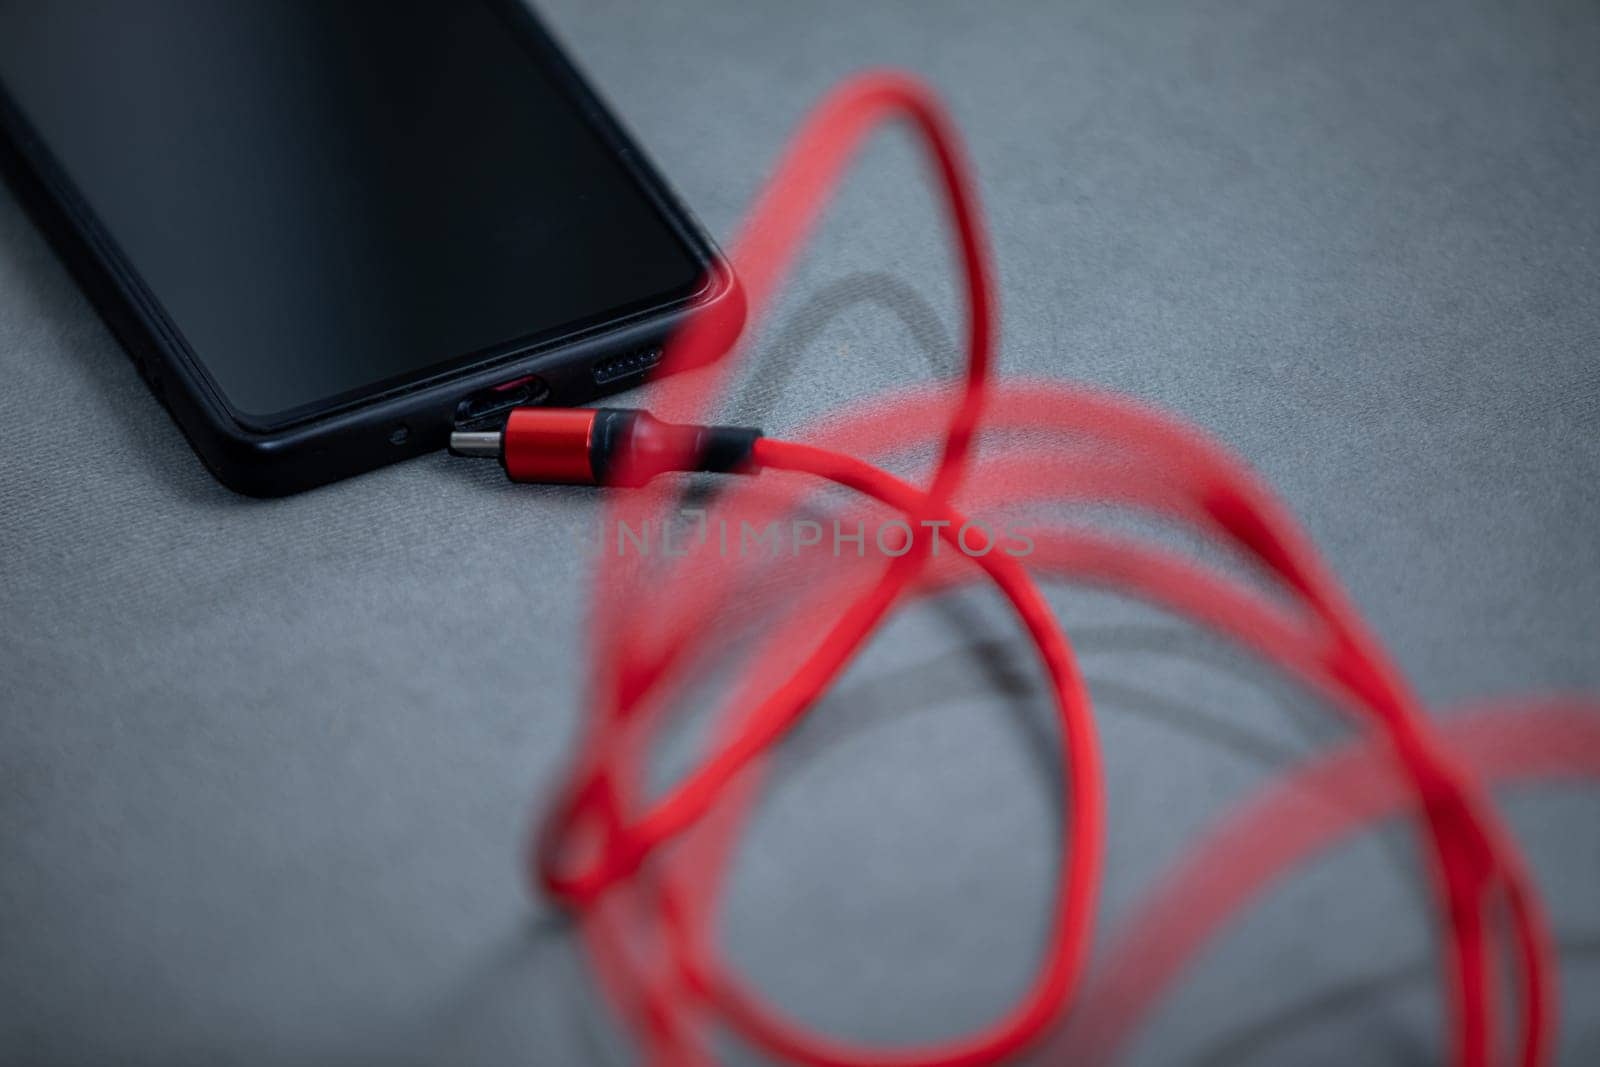 On the gray fabric lies a black smartphone and and red charger cable. Smartphones need to be charged frequently.